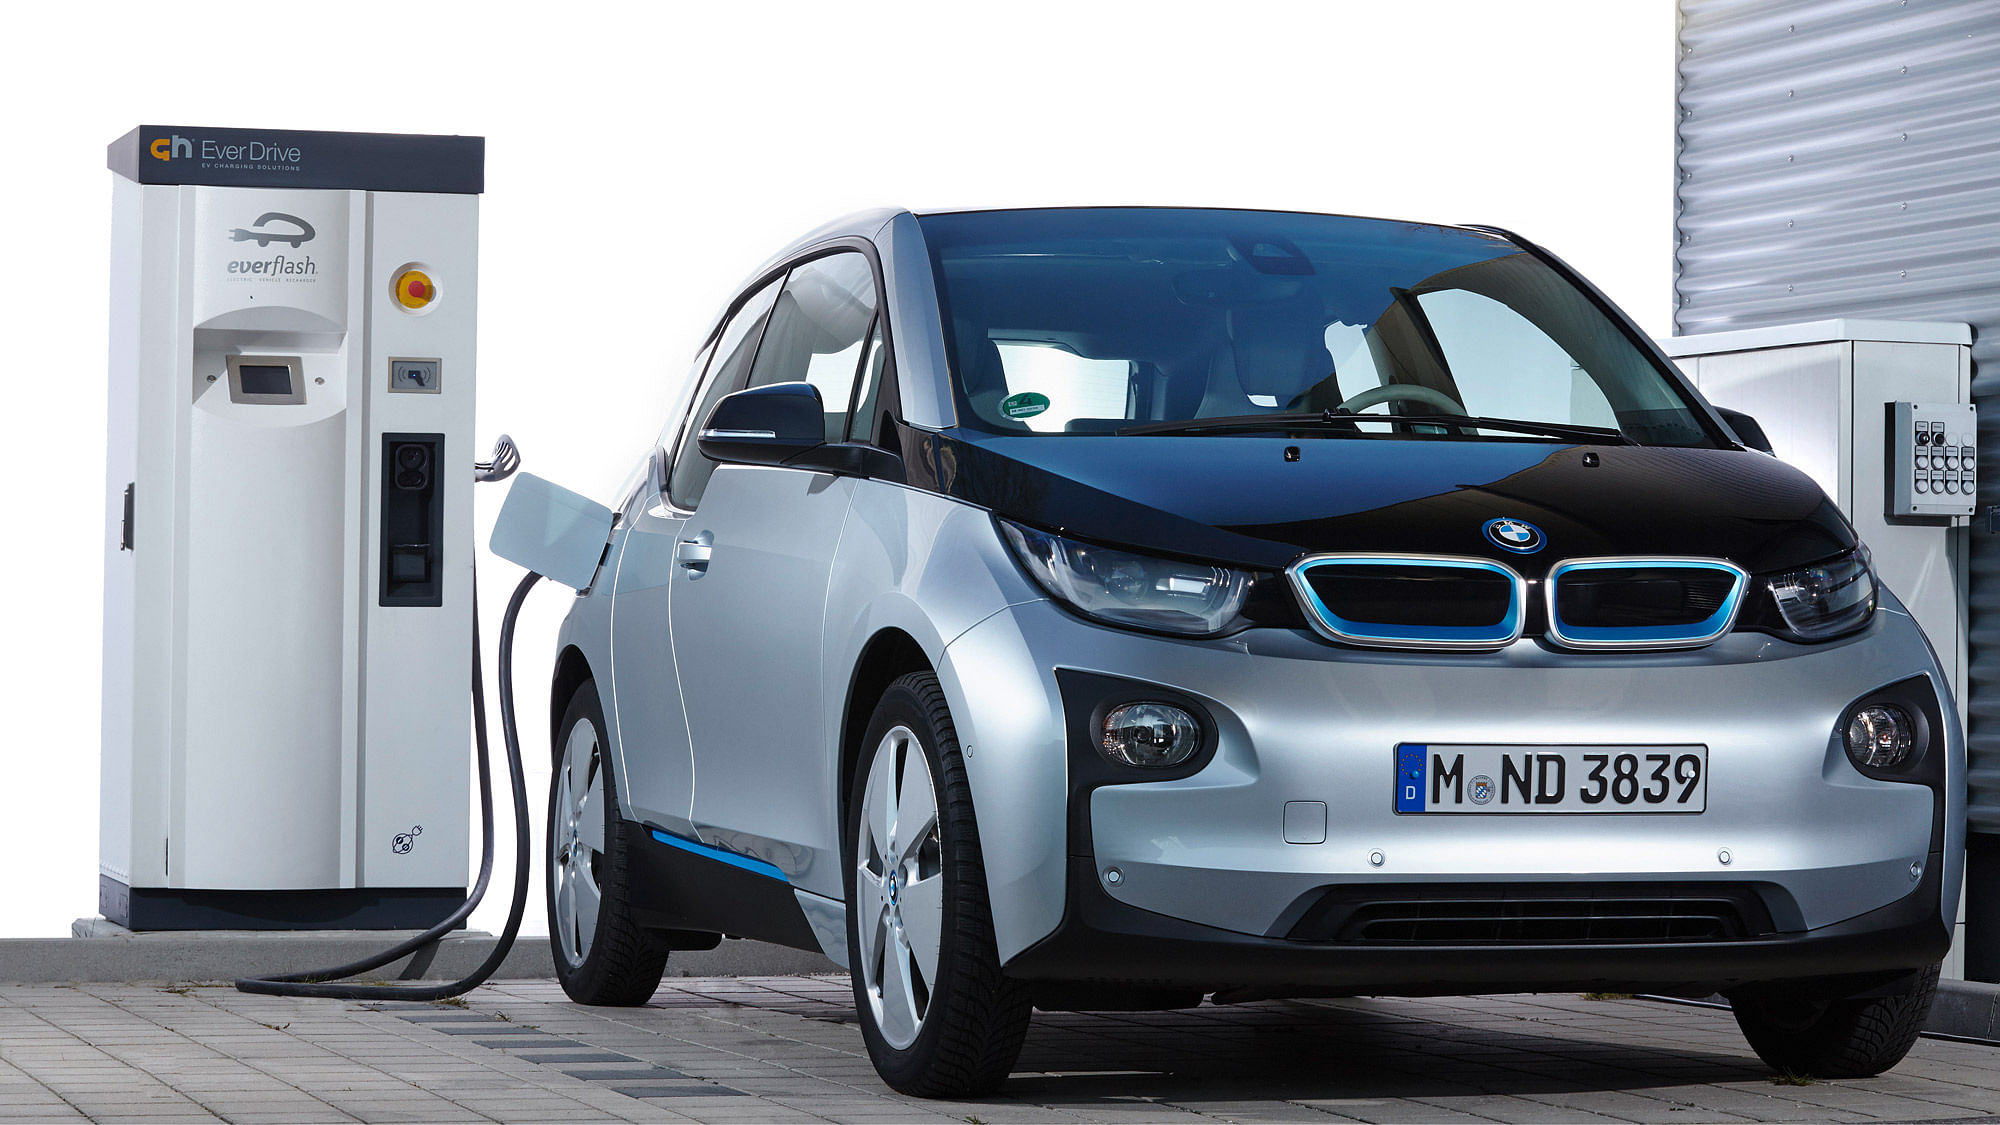 The BMW i3 is one of the most popular electric vehicles sold by the German automaker.&nbsp;